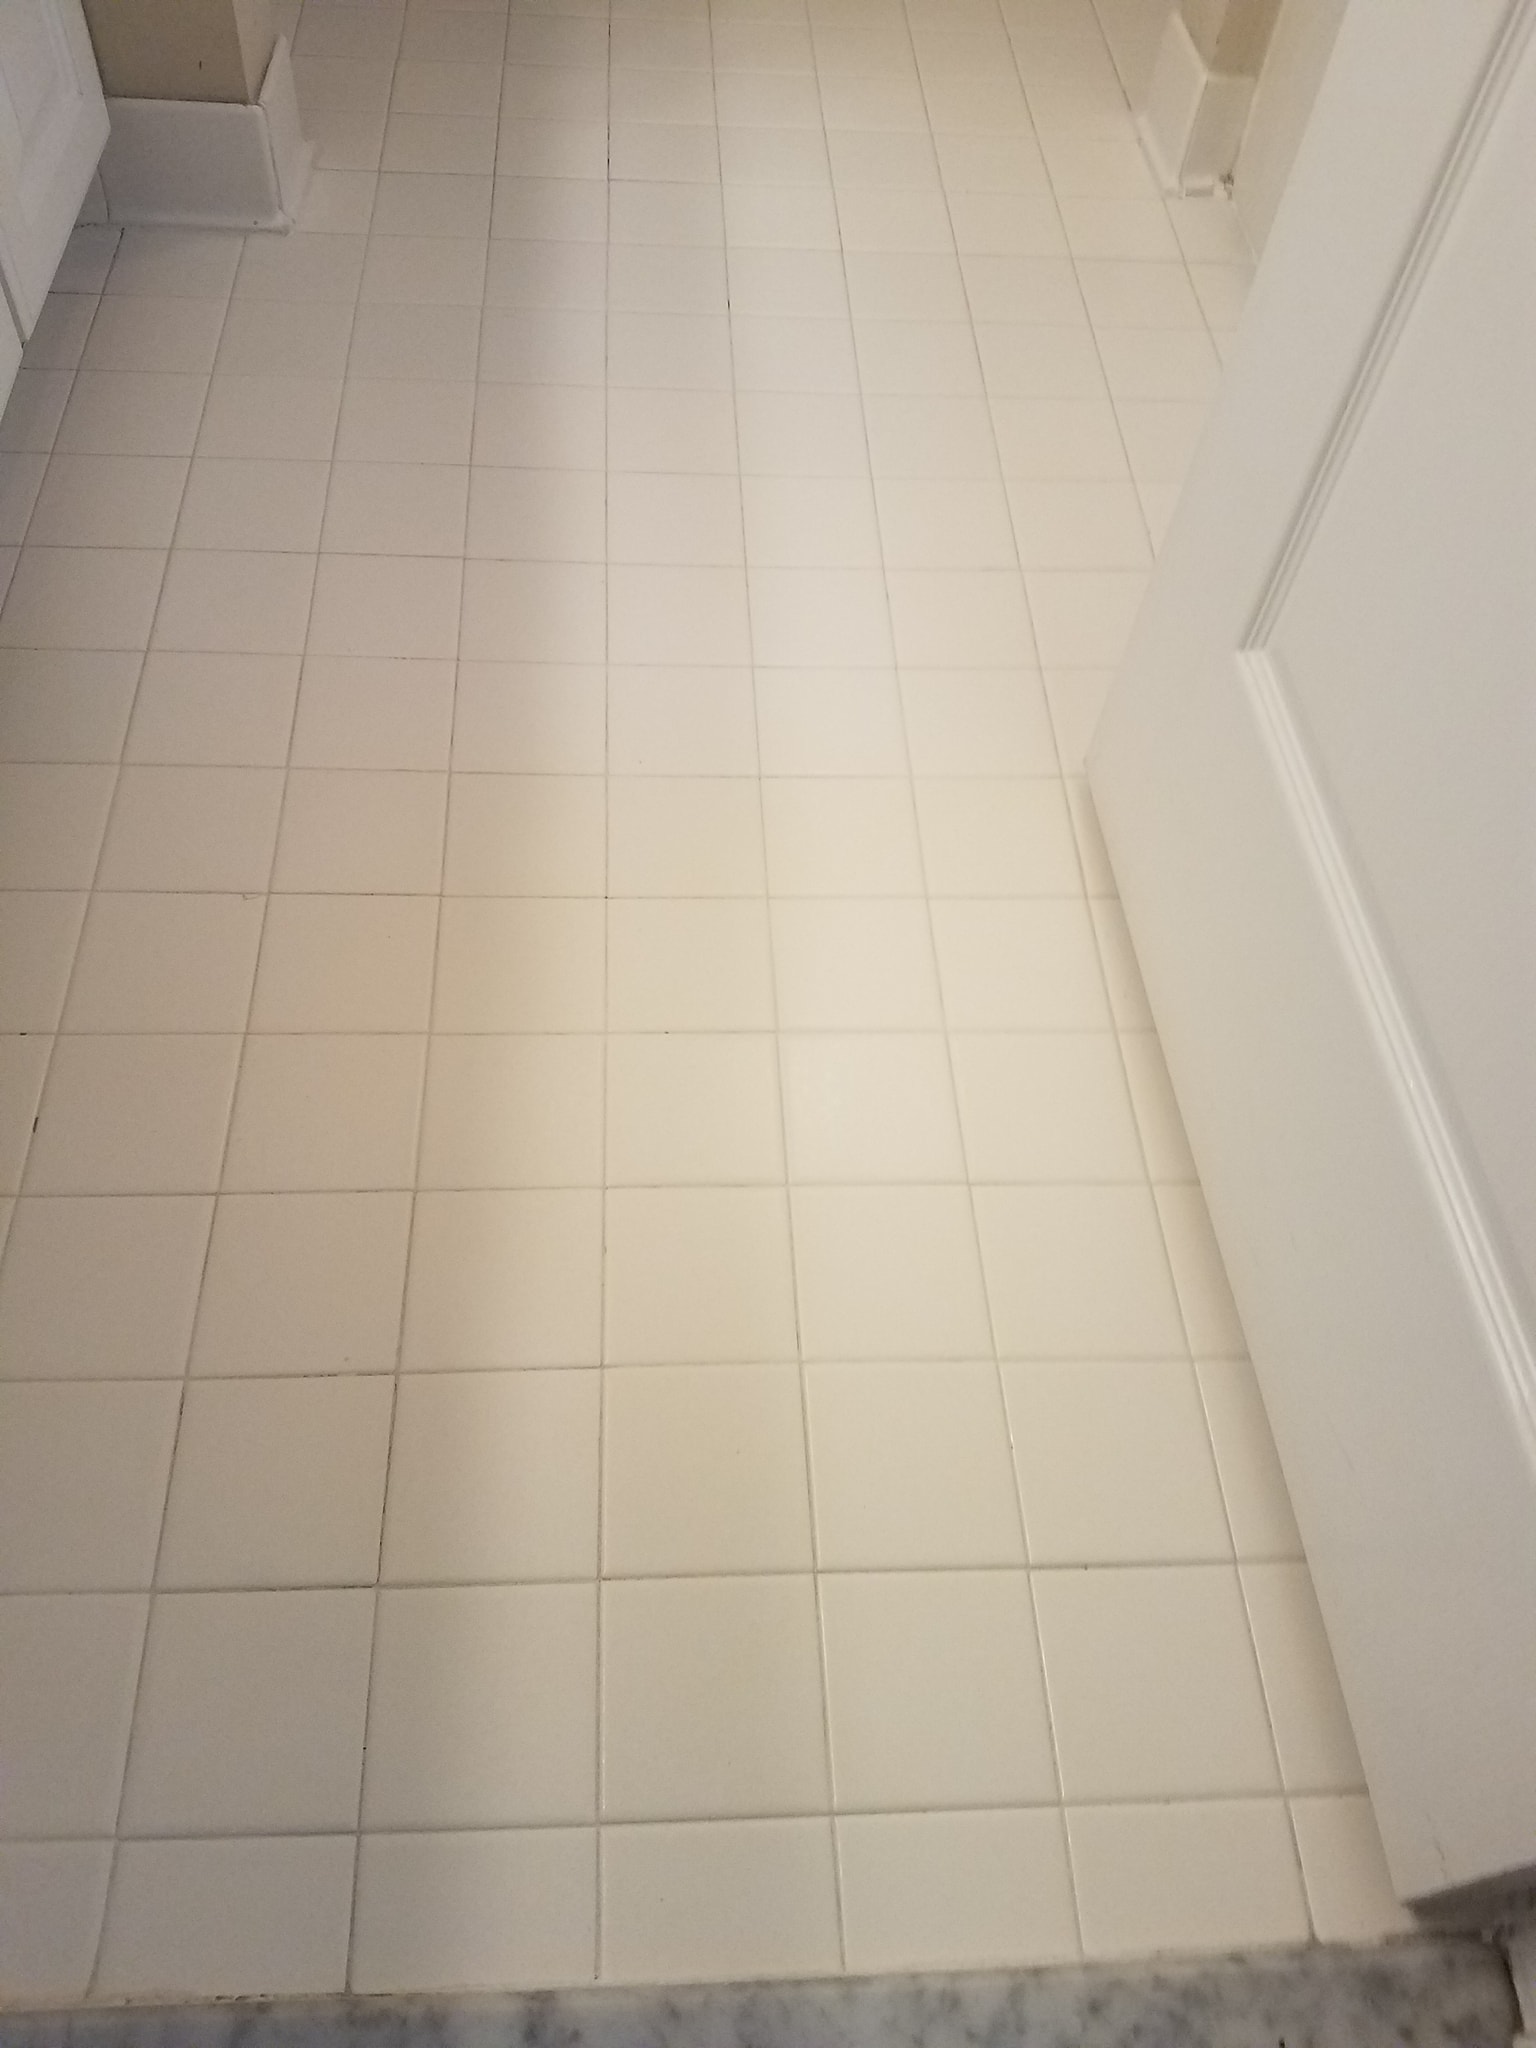 Tiles and grouts contain many germs and pollutants when left untreated or poorly maintained over time. These microorganisms may eventually damage flooring and expose residents to various health concerns. Discolored or stained tiles and grouts are unsightly and reduce the value of your spaces. Also, the porous grout and tile designs make them inaccessible to DIY cleaning solutions. Therefore, it is crucial to seek a reliable expert like Eco-Dry to ensure that your tiles and grouts remain spotless and uncontaminated. Eco-Dry for Flawless Tiles and Grouts Eco-Dry offers a deep clean that regular mops and brushes do not provide. Our dedicated specialists apply odorless, eco-friendly detergents that permeate the porous surfaces of tiles and grouts to eliminate common pollutants such as mold, mildew, germs, fungus, and other harmful bacteria. Each member of the Eco-Dry team possesses a keen eye for detail, never missing a spot on your precious flooring. Additionally, we have the specialized tools and expertise to unclog your grout lines, freeing the gaps from harmful build-up. We apply the most advanced washing techniques that remove stubborn grime from tile surfaces, resulting in a sparkly sheen. Additionally, our team goes the extra mile, informing you of actions taken in the case of damaged or loose tiles and grouts (i.e., reapplying sealants) to act fast and decisively to prevent further deterioration. Contact us today to discover how you can restore the luster of your tiles and grouts safely and without delay in the most eco-friendly way.